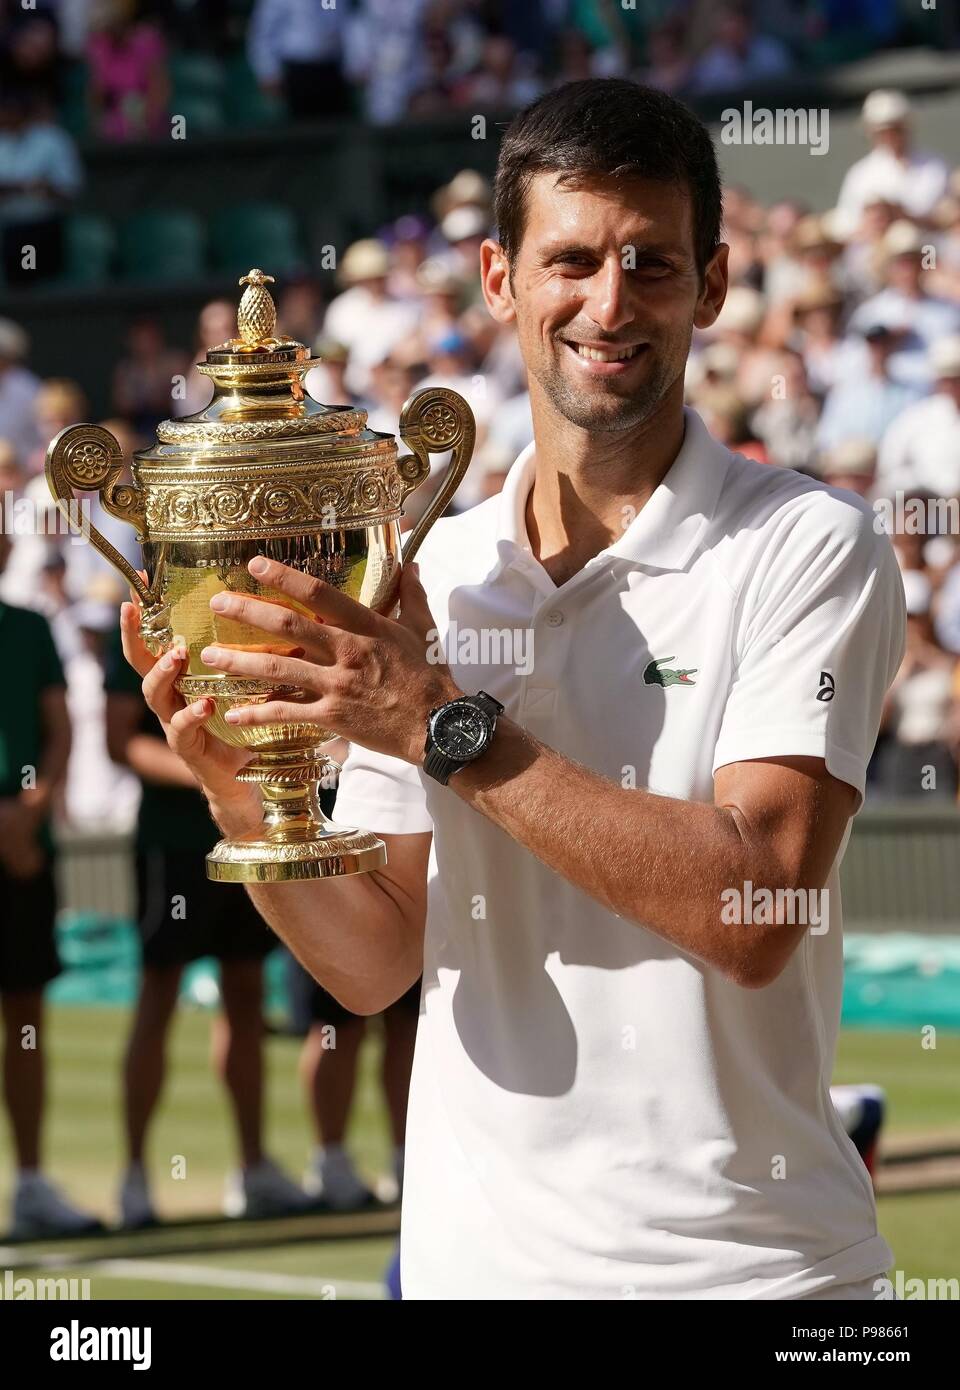 london-britain-15th-july-2018-novak-djokovic-of-serbia-shows-his-trophy-after-winning-the-mens-singles-final-match-against-kevin-anderson-of-south-africa-at-the-wimbledon-championships-2018-in-london-britain-on-july-15-2018-novak-djokovic-won-3-0-credit-guo-qiudaxinhuaalamy-live-news-P98661.jpg